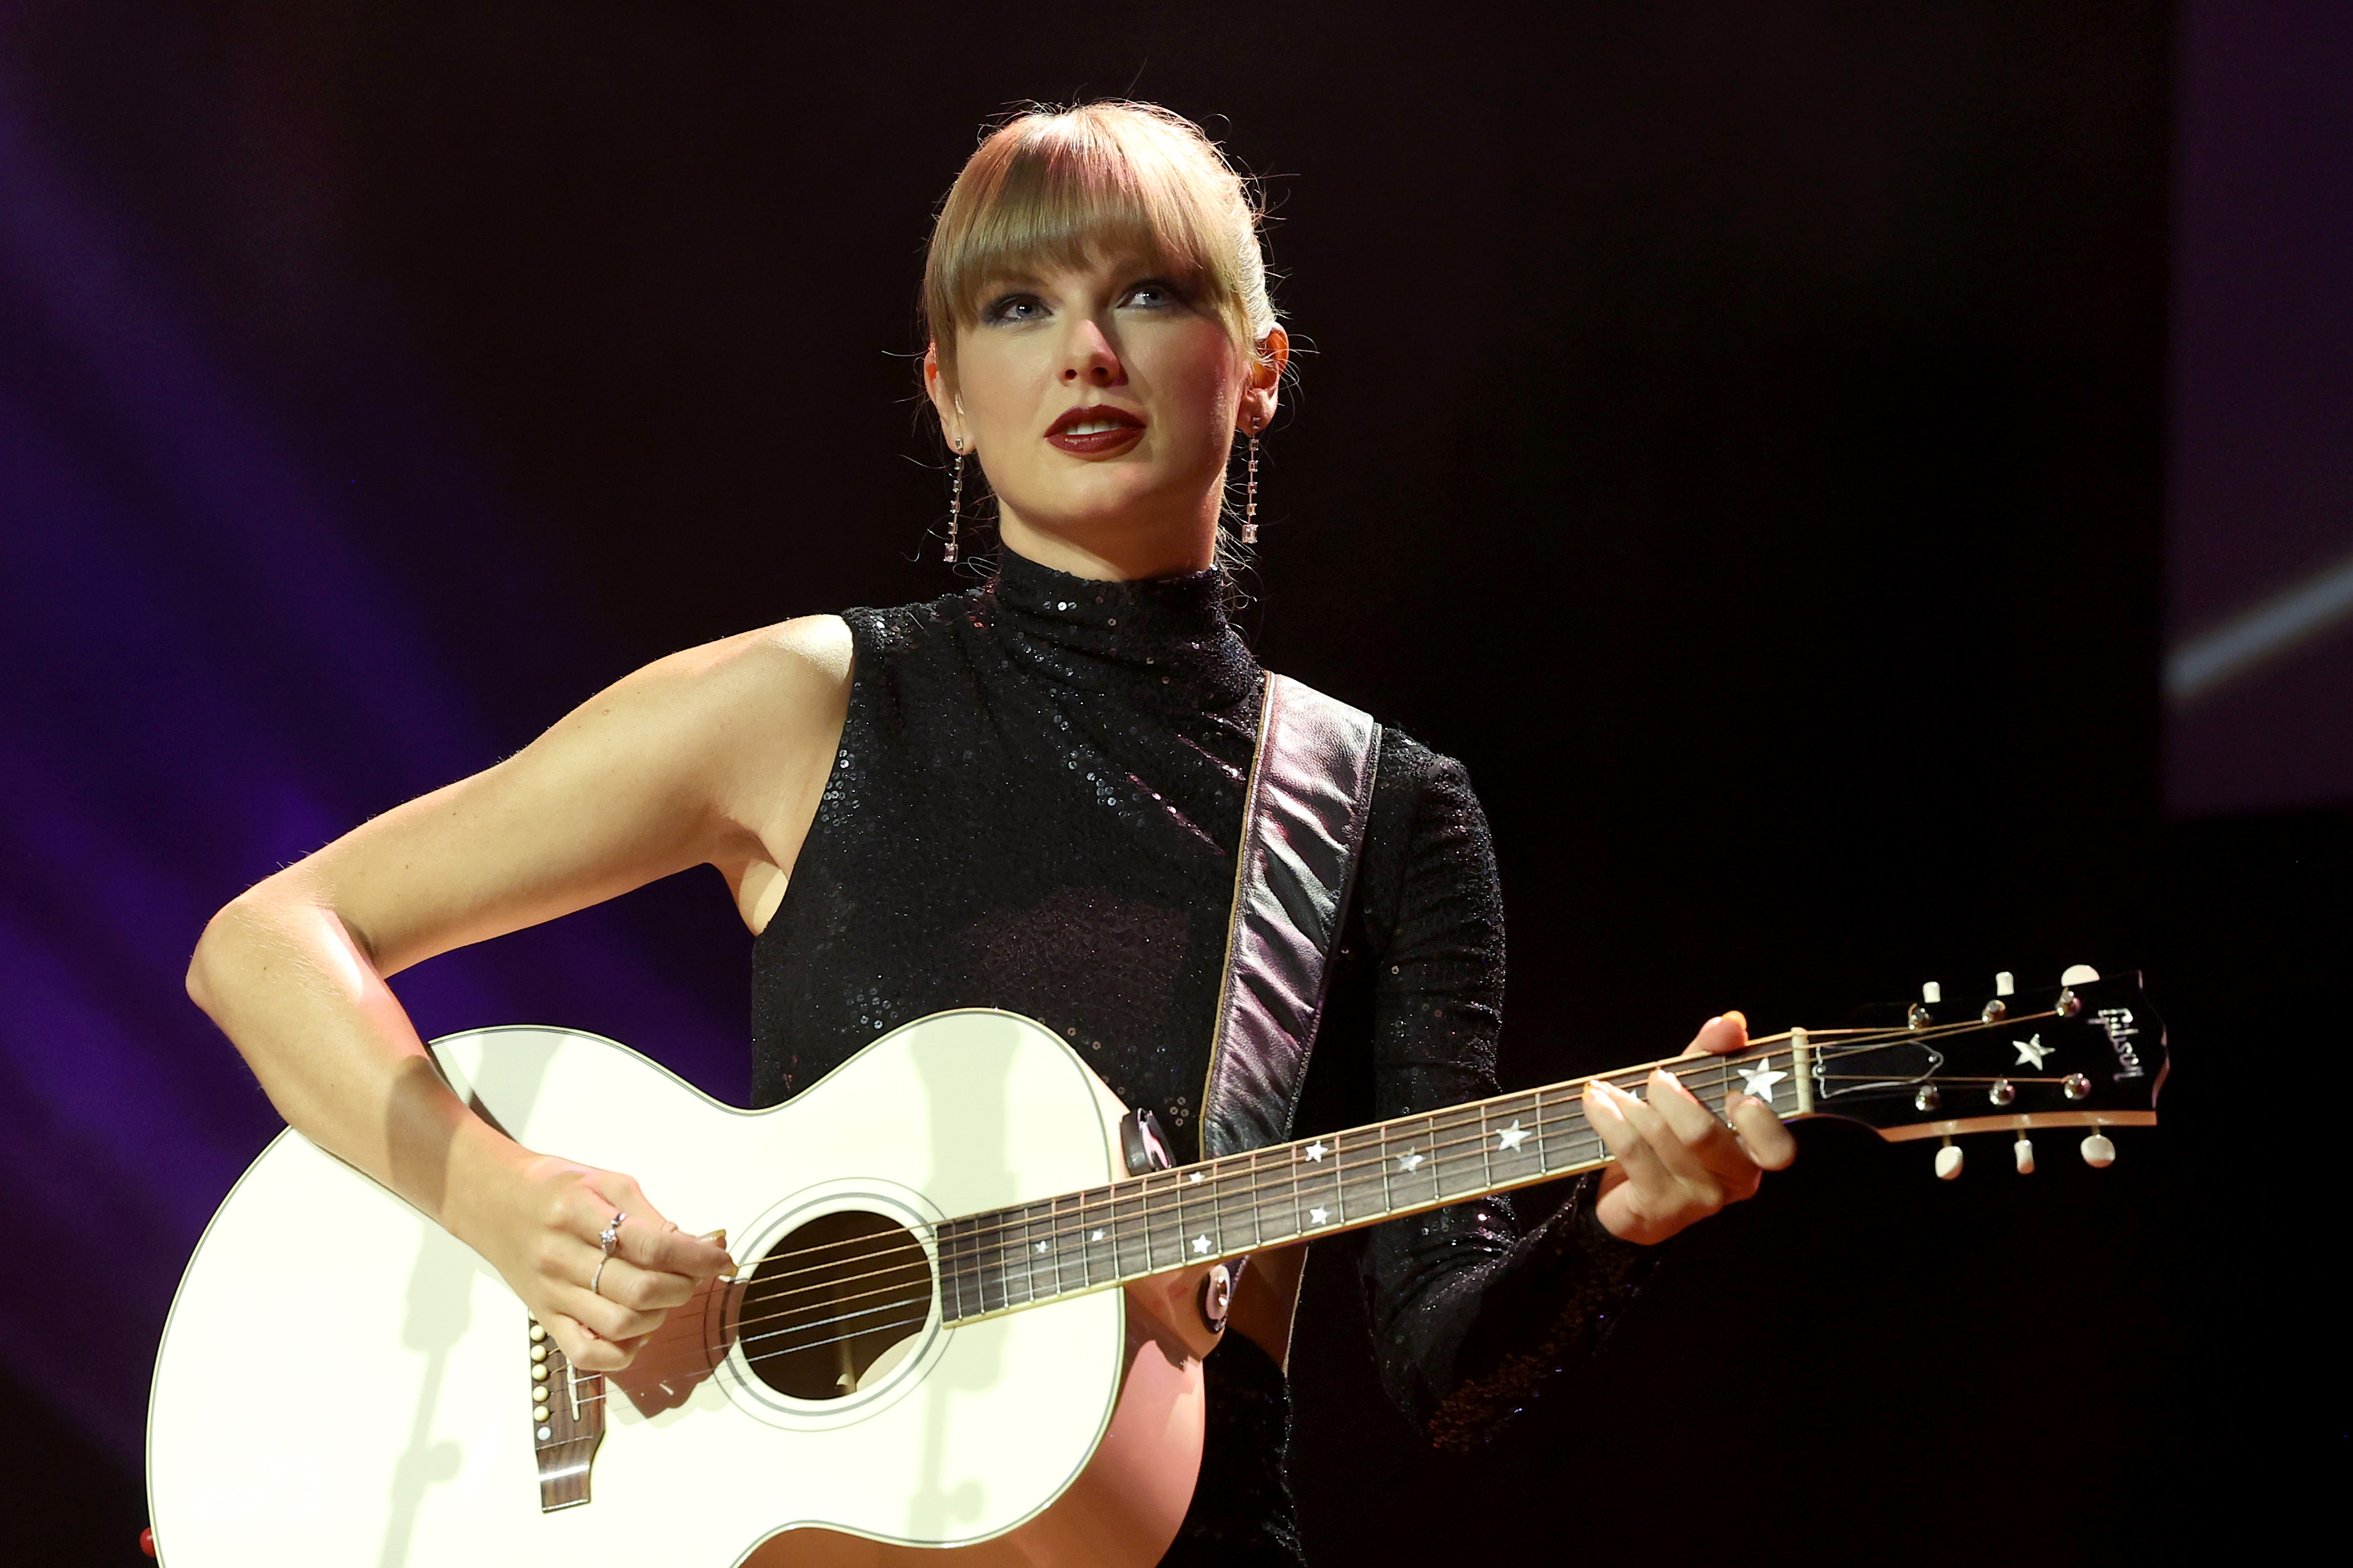 NSAI Songwriter-Artist of the Decade honoree, Taylor Swift performs during NSAI 2022 Nashville Songwriter Awards